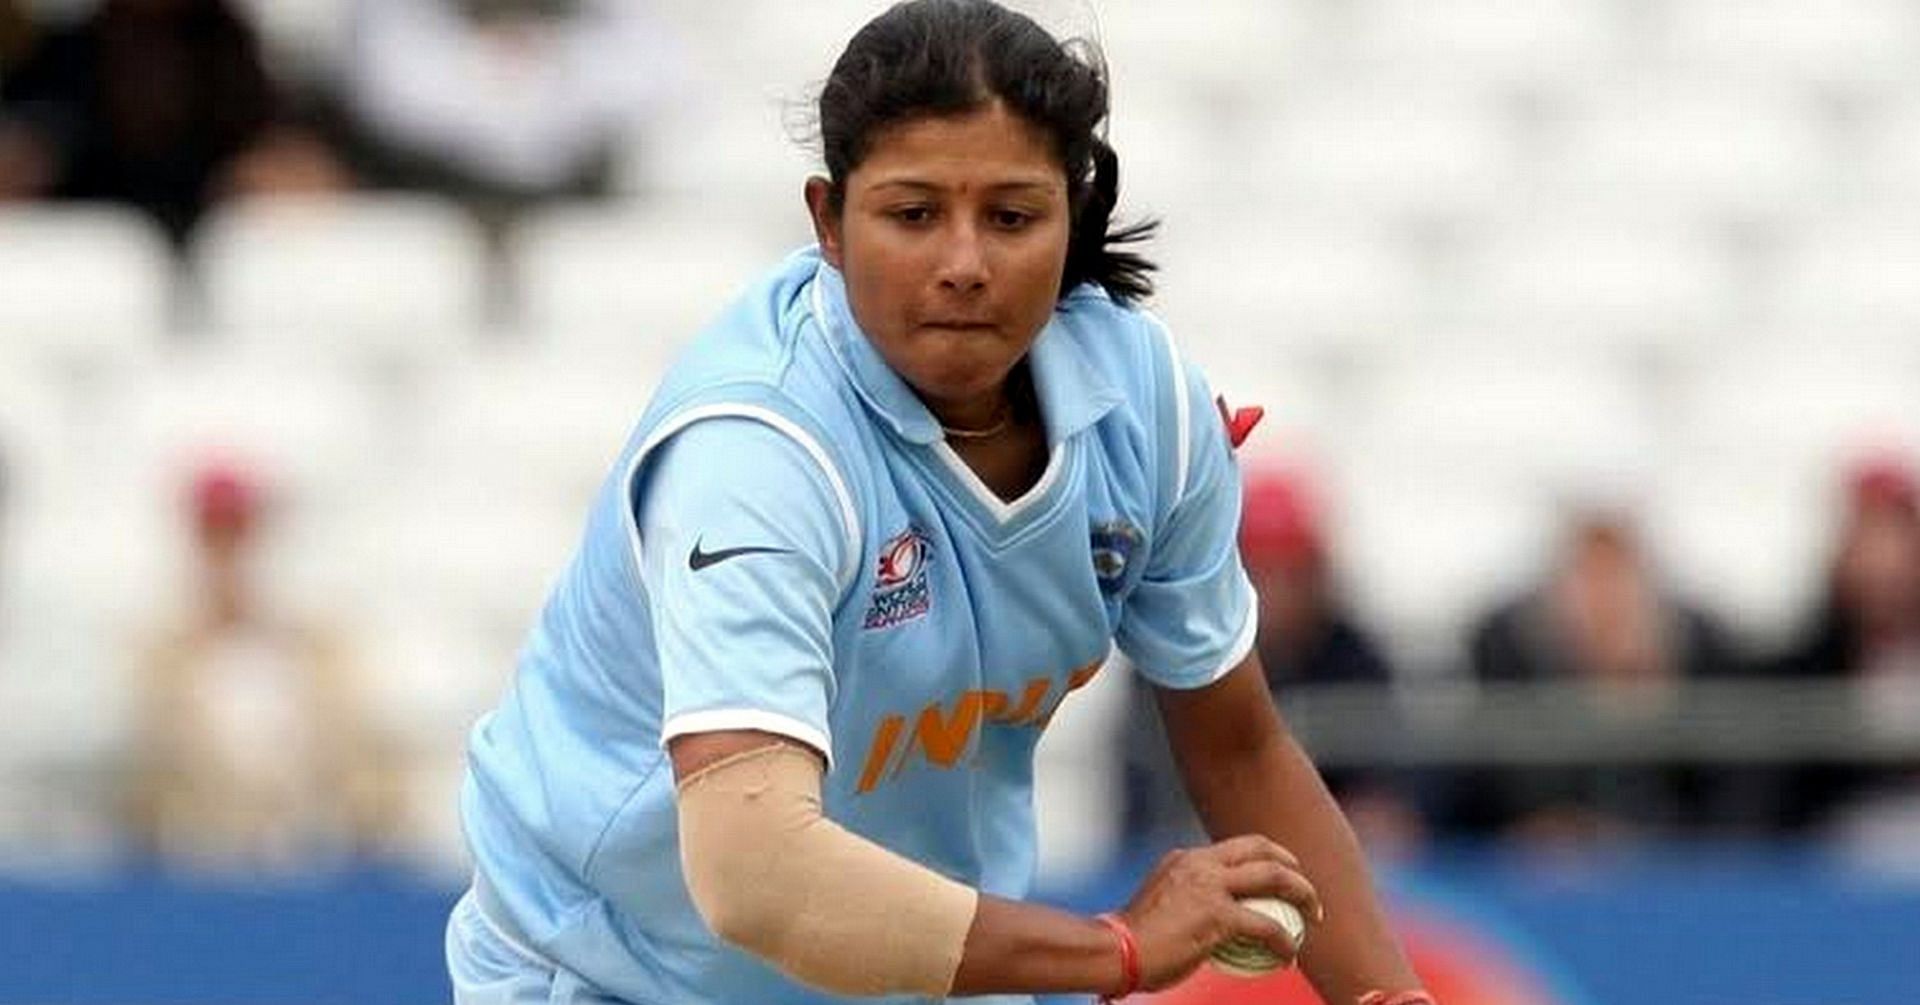 Rumeli Dhar scored 1,328 runs and took 84 wickets in international cricket. Image: Reuters